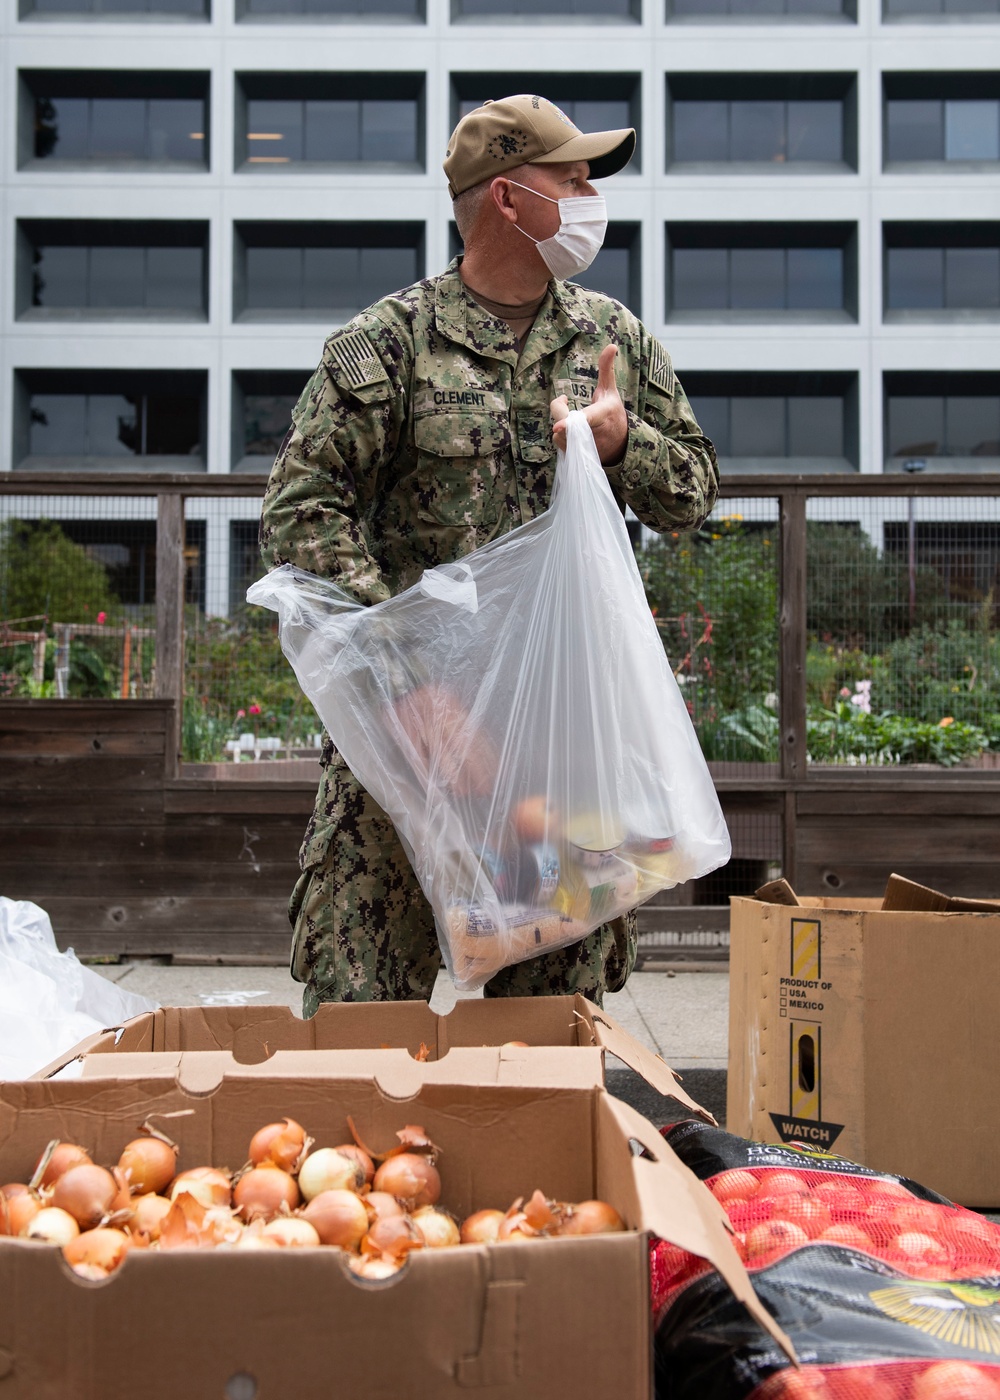 McCain Sailors package food during a community service project at SF-Marin Food Bank